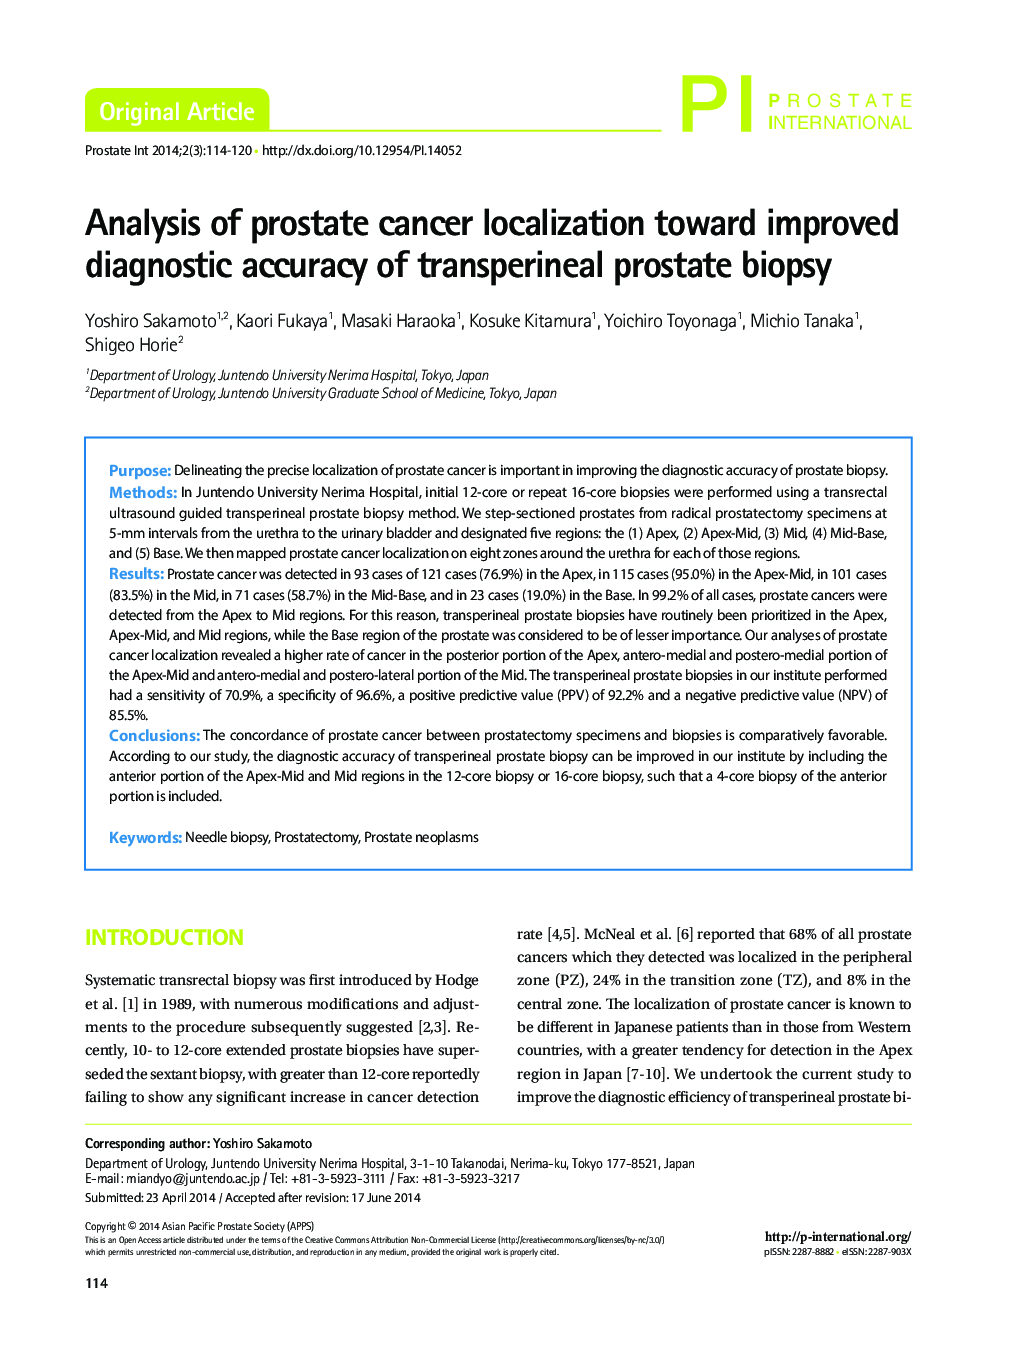 Analysis of prostate cancer localization toward improved diagnostic accuracy of transperineal prostate biopsy 